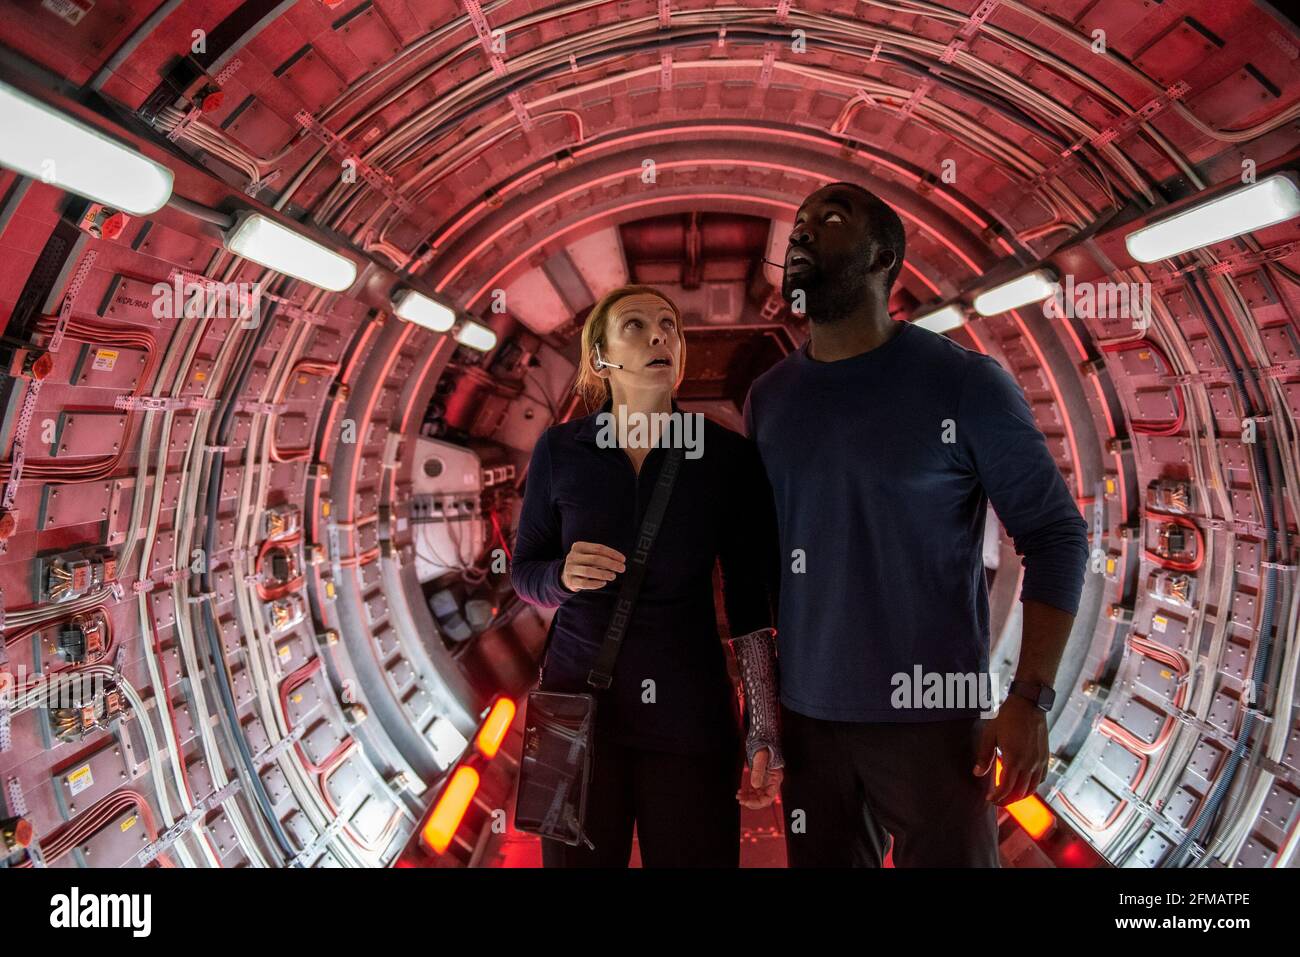 RELEASE DATE: April 22, 2021 TITLE: Stowaway STUDIO: RainMaker Films DIRECTOR: Joe Penna PLOT: A three-person crew on a mission to Mars faces an impossible choice when an unplanned passenger jeopardizes the lives of everyone on board. STARRING: TONI COLLETTE as Marina Barnett, SHAMIER ANDERSON as Michael Adams. (Credit Image: © RainMaker Films/Entertainment Pictures) Stock Photo